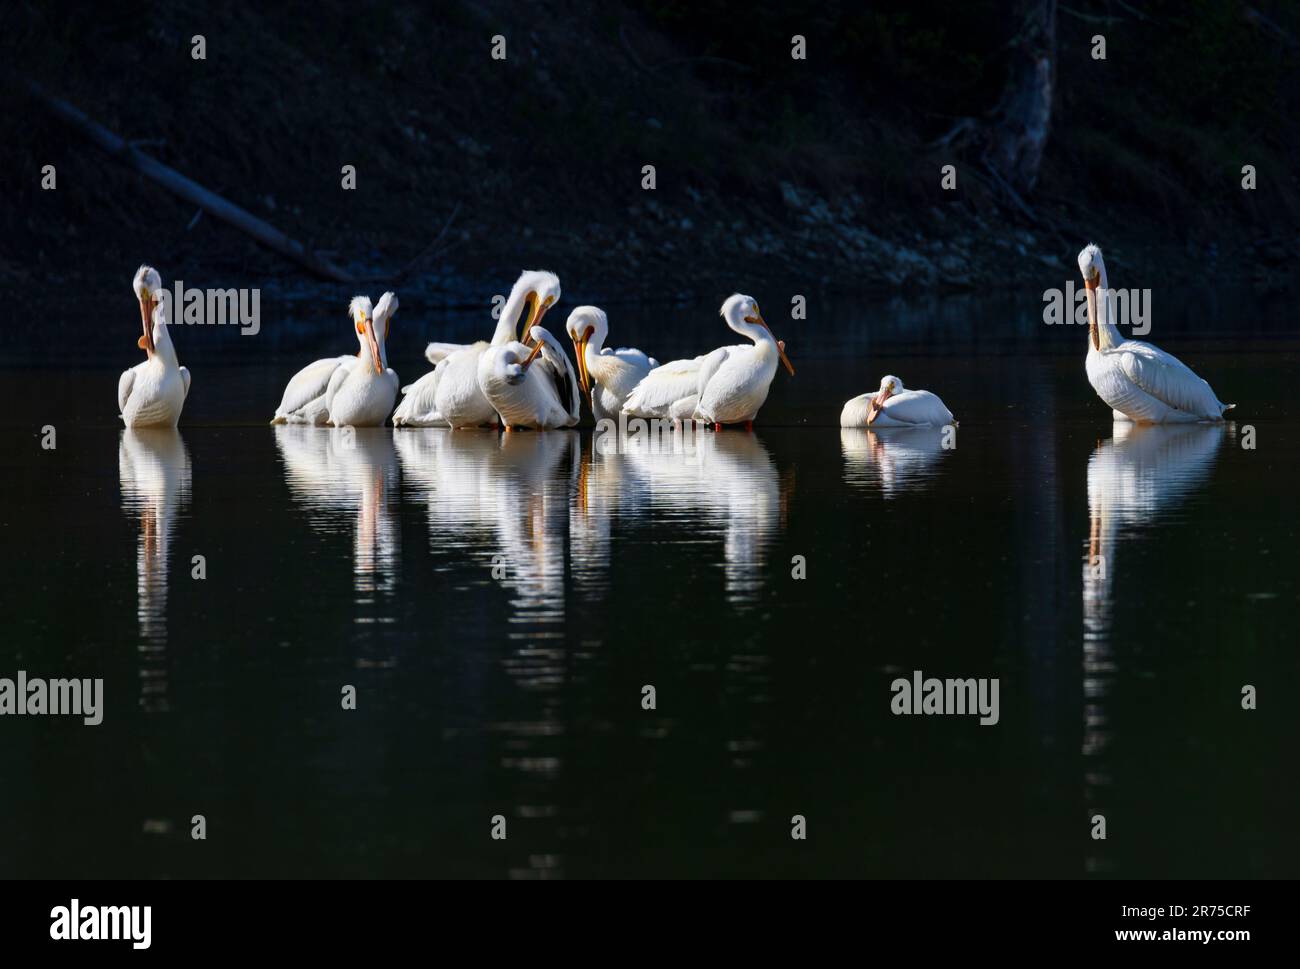 A pod of American White Pelicans (Pelicanus erythrorhynchos) preen themselves on the Snake River, Oxbow Bend, Grand Teton National Park, WY, USA. Stock Photo